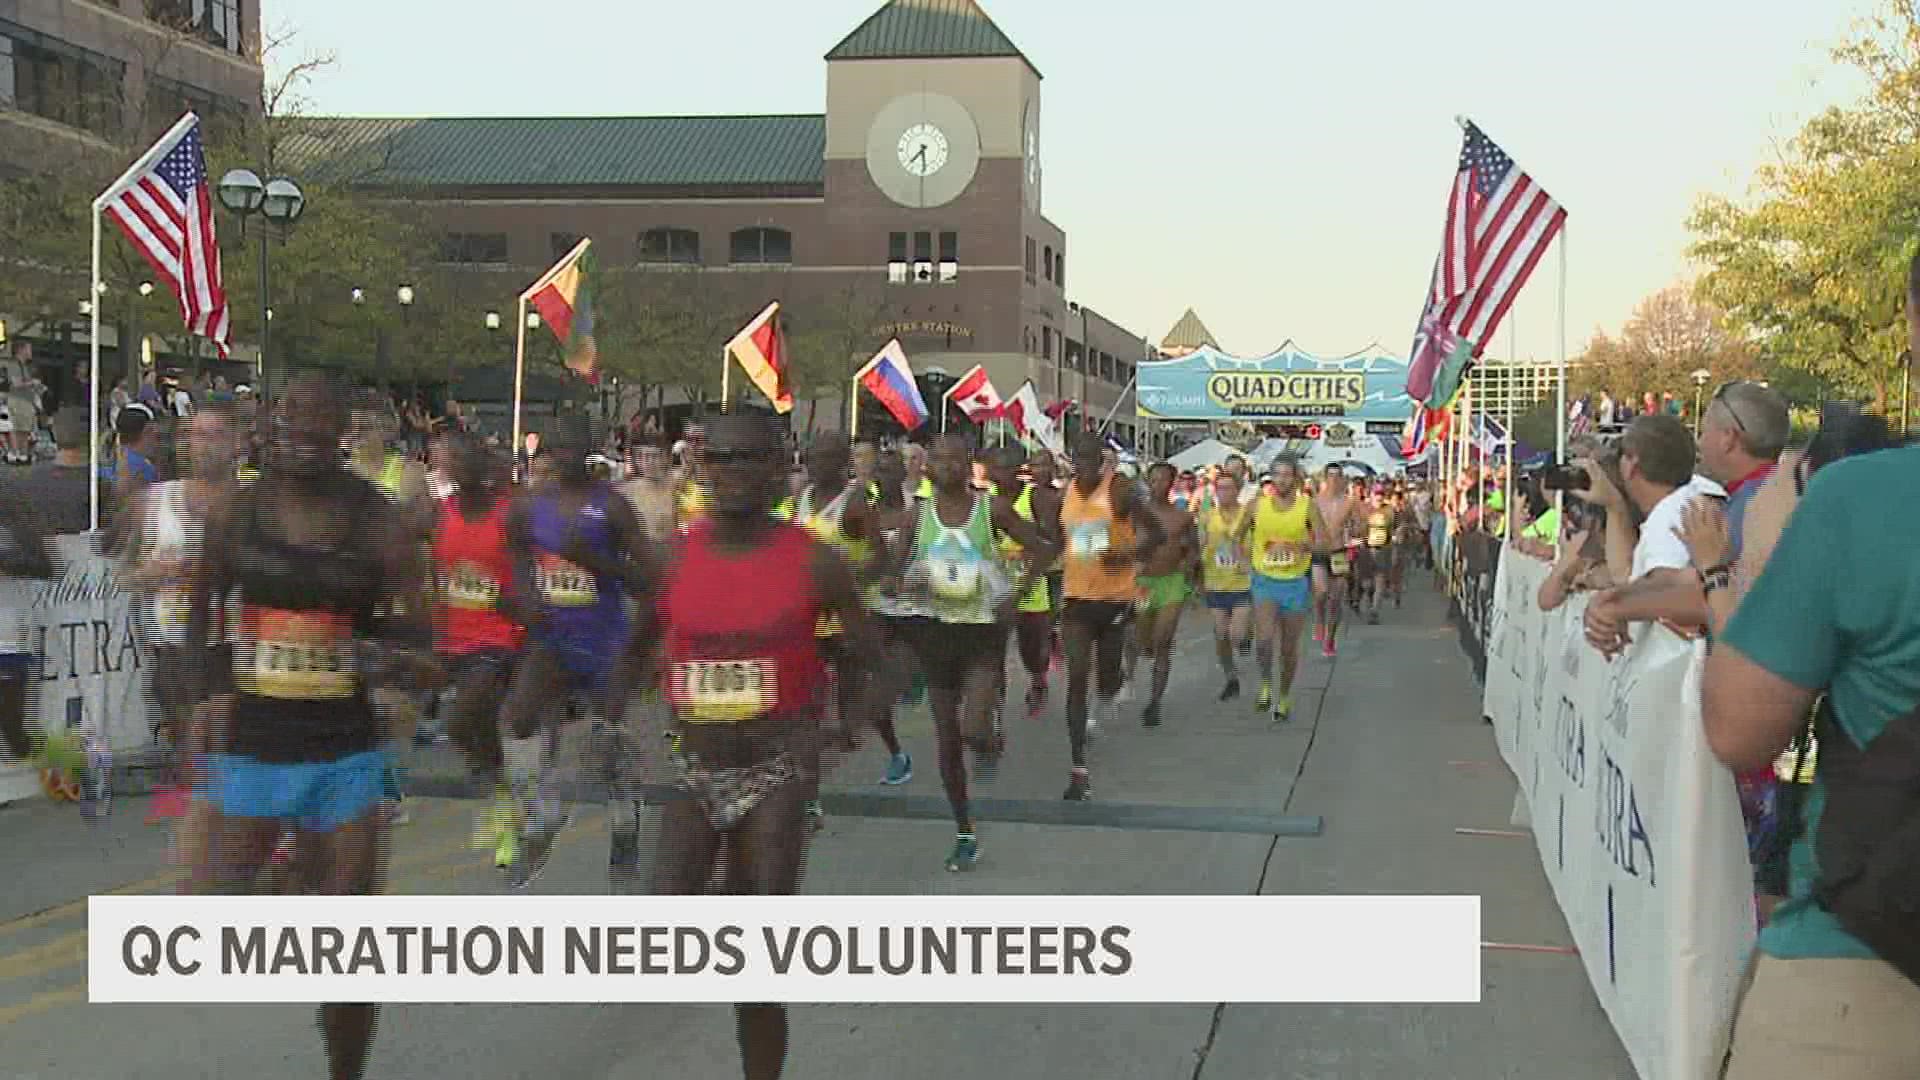 The marathon is held up by the hands of 1,400 volunteers every year, and officials are looking to fill positions ahead of the race on Sept. 24 and 25.